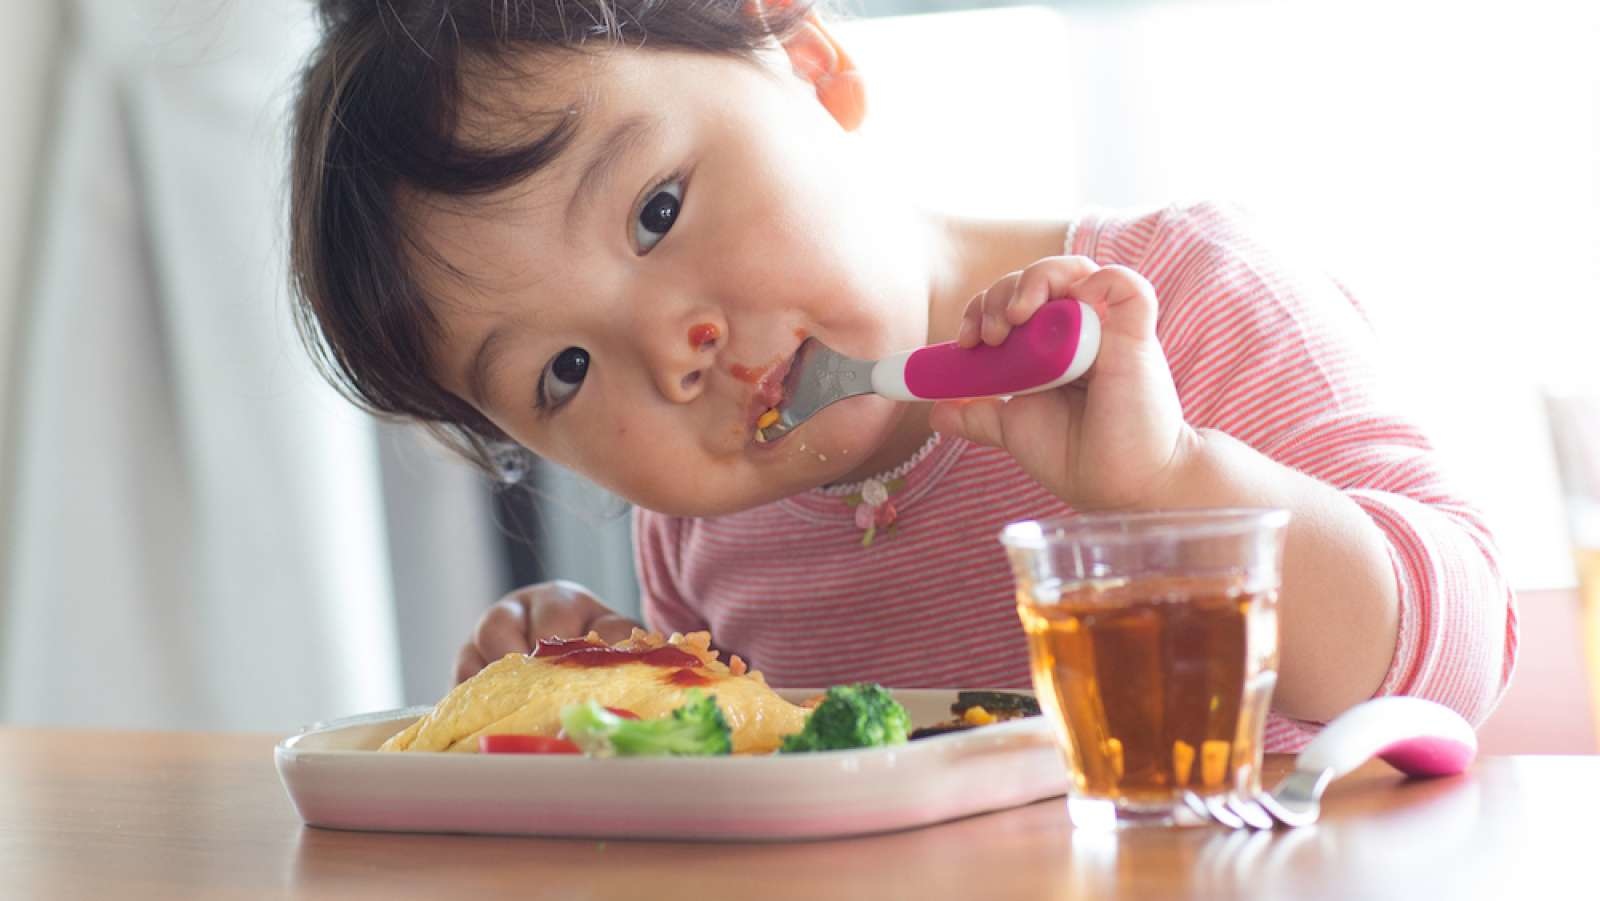 30 of toddlers dont eat vegetables daily says new study featured